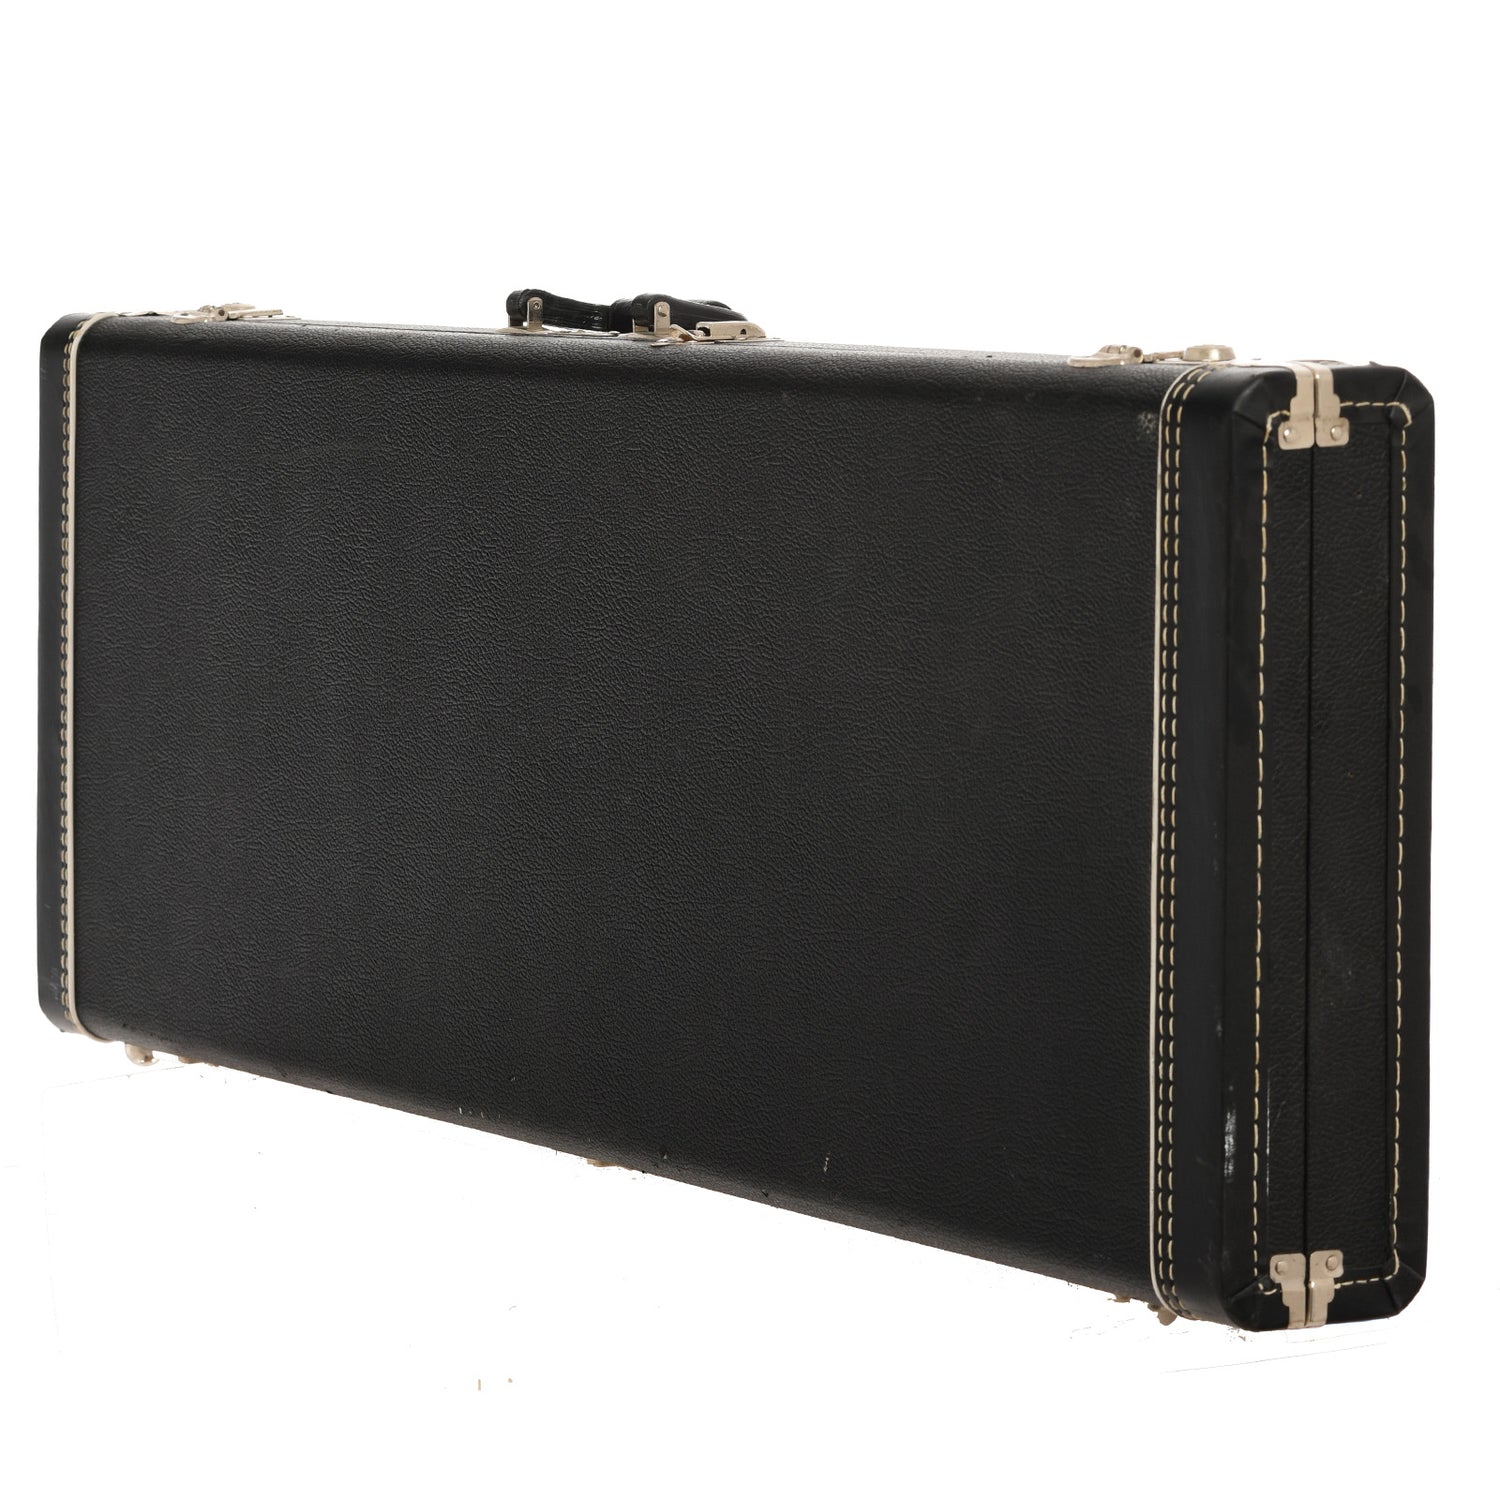 Case for Fender American Deluxe Fat Stratocaster